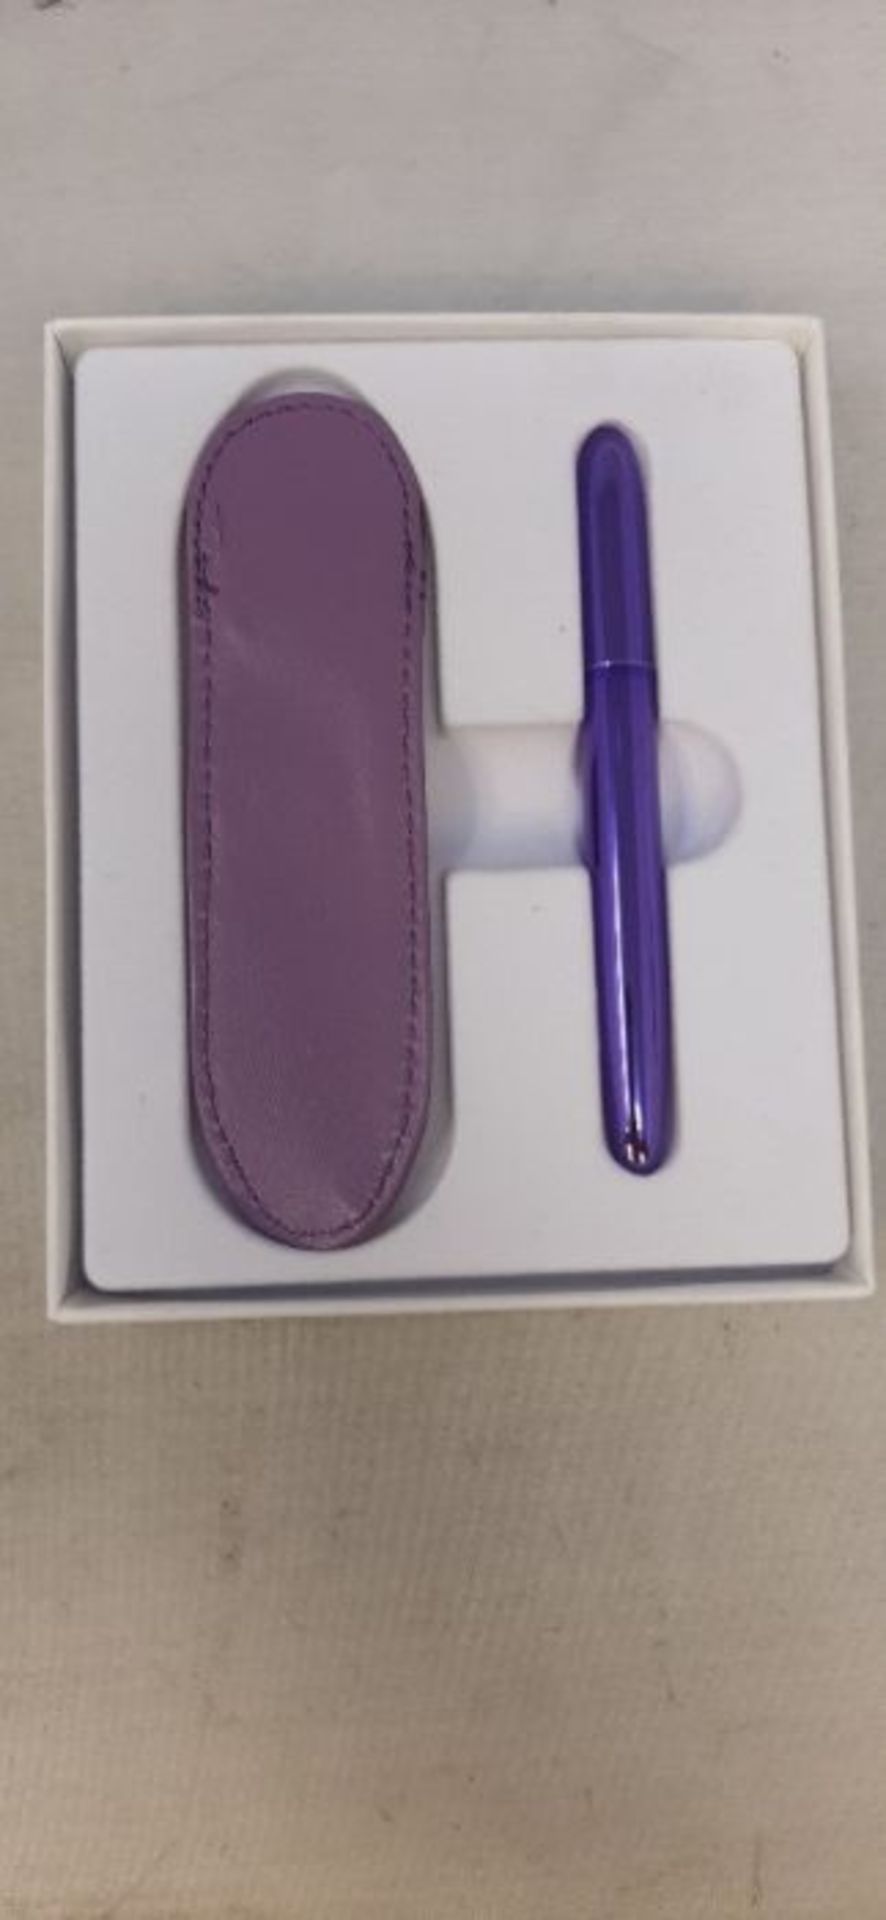 Fisher Bullet Space Pen with Purple Leather Pouch - Purple Passion - Image 3 of 3